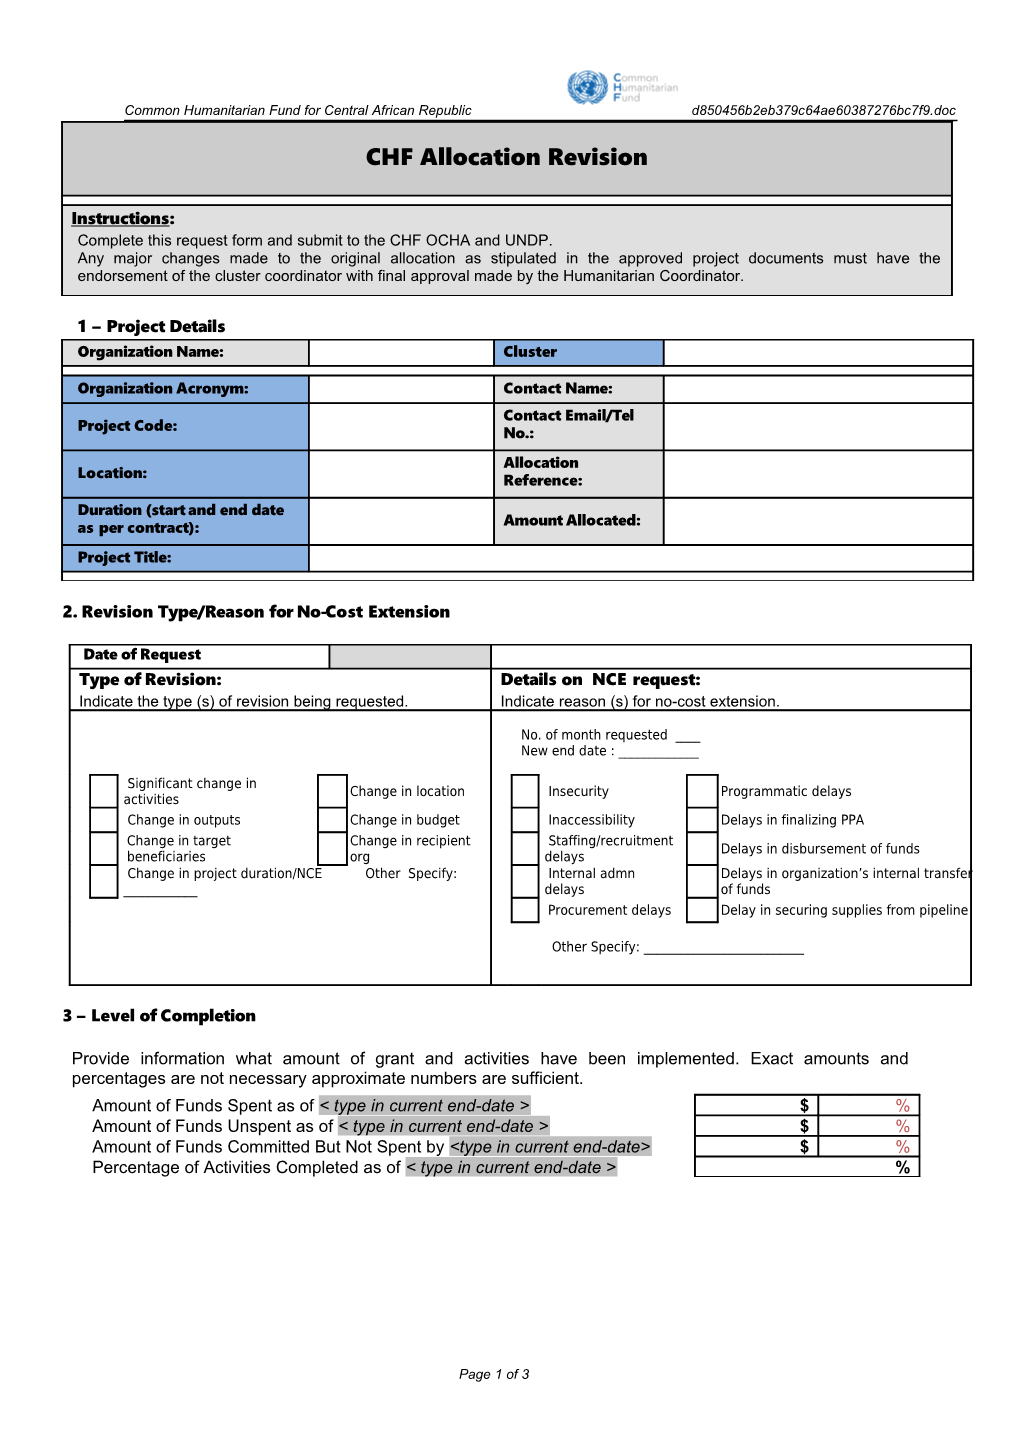 CHF 2007 No-Cost Extension Request Form